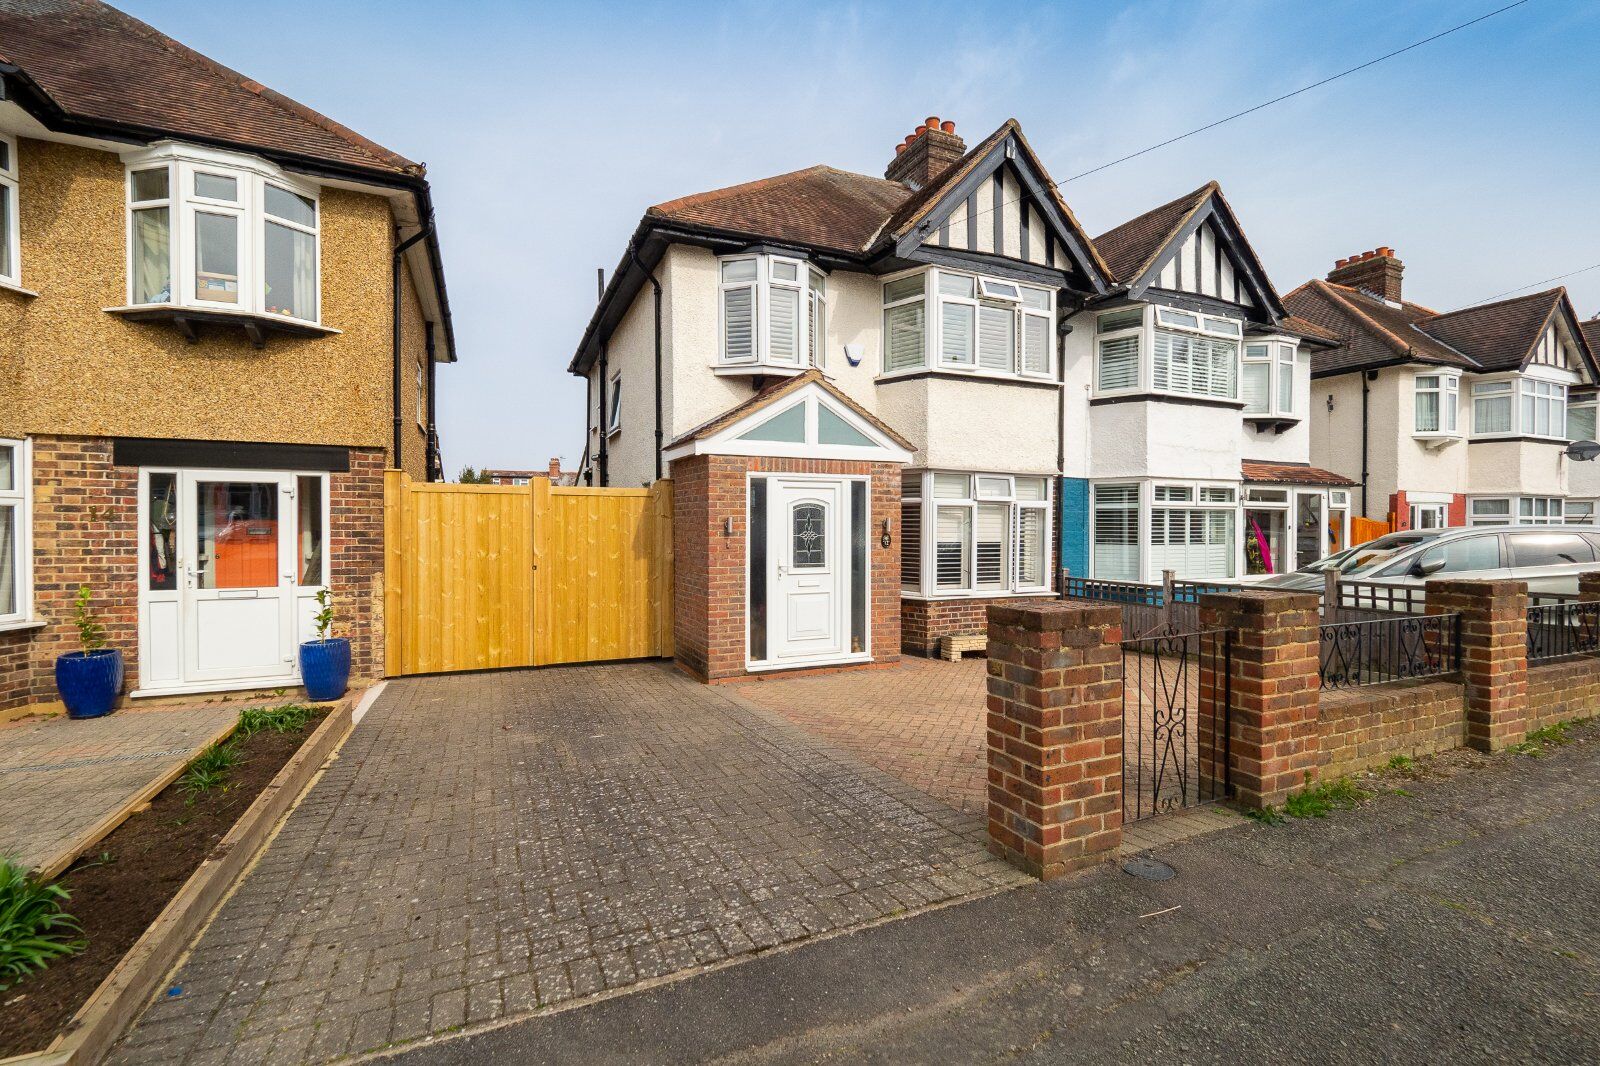 3 bedroom semi detached house for sale Romany Gardens, Sutton, SM3, main image